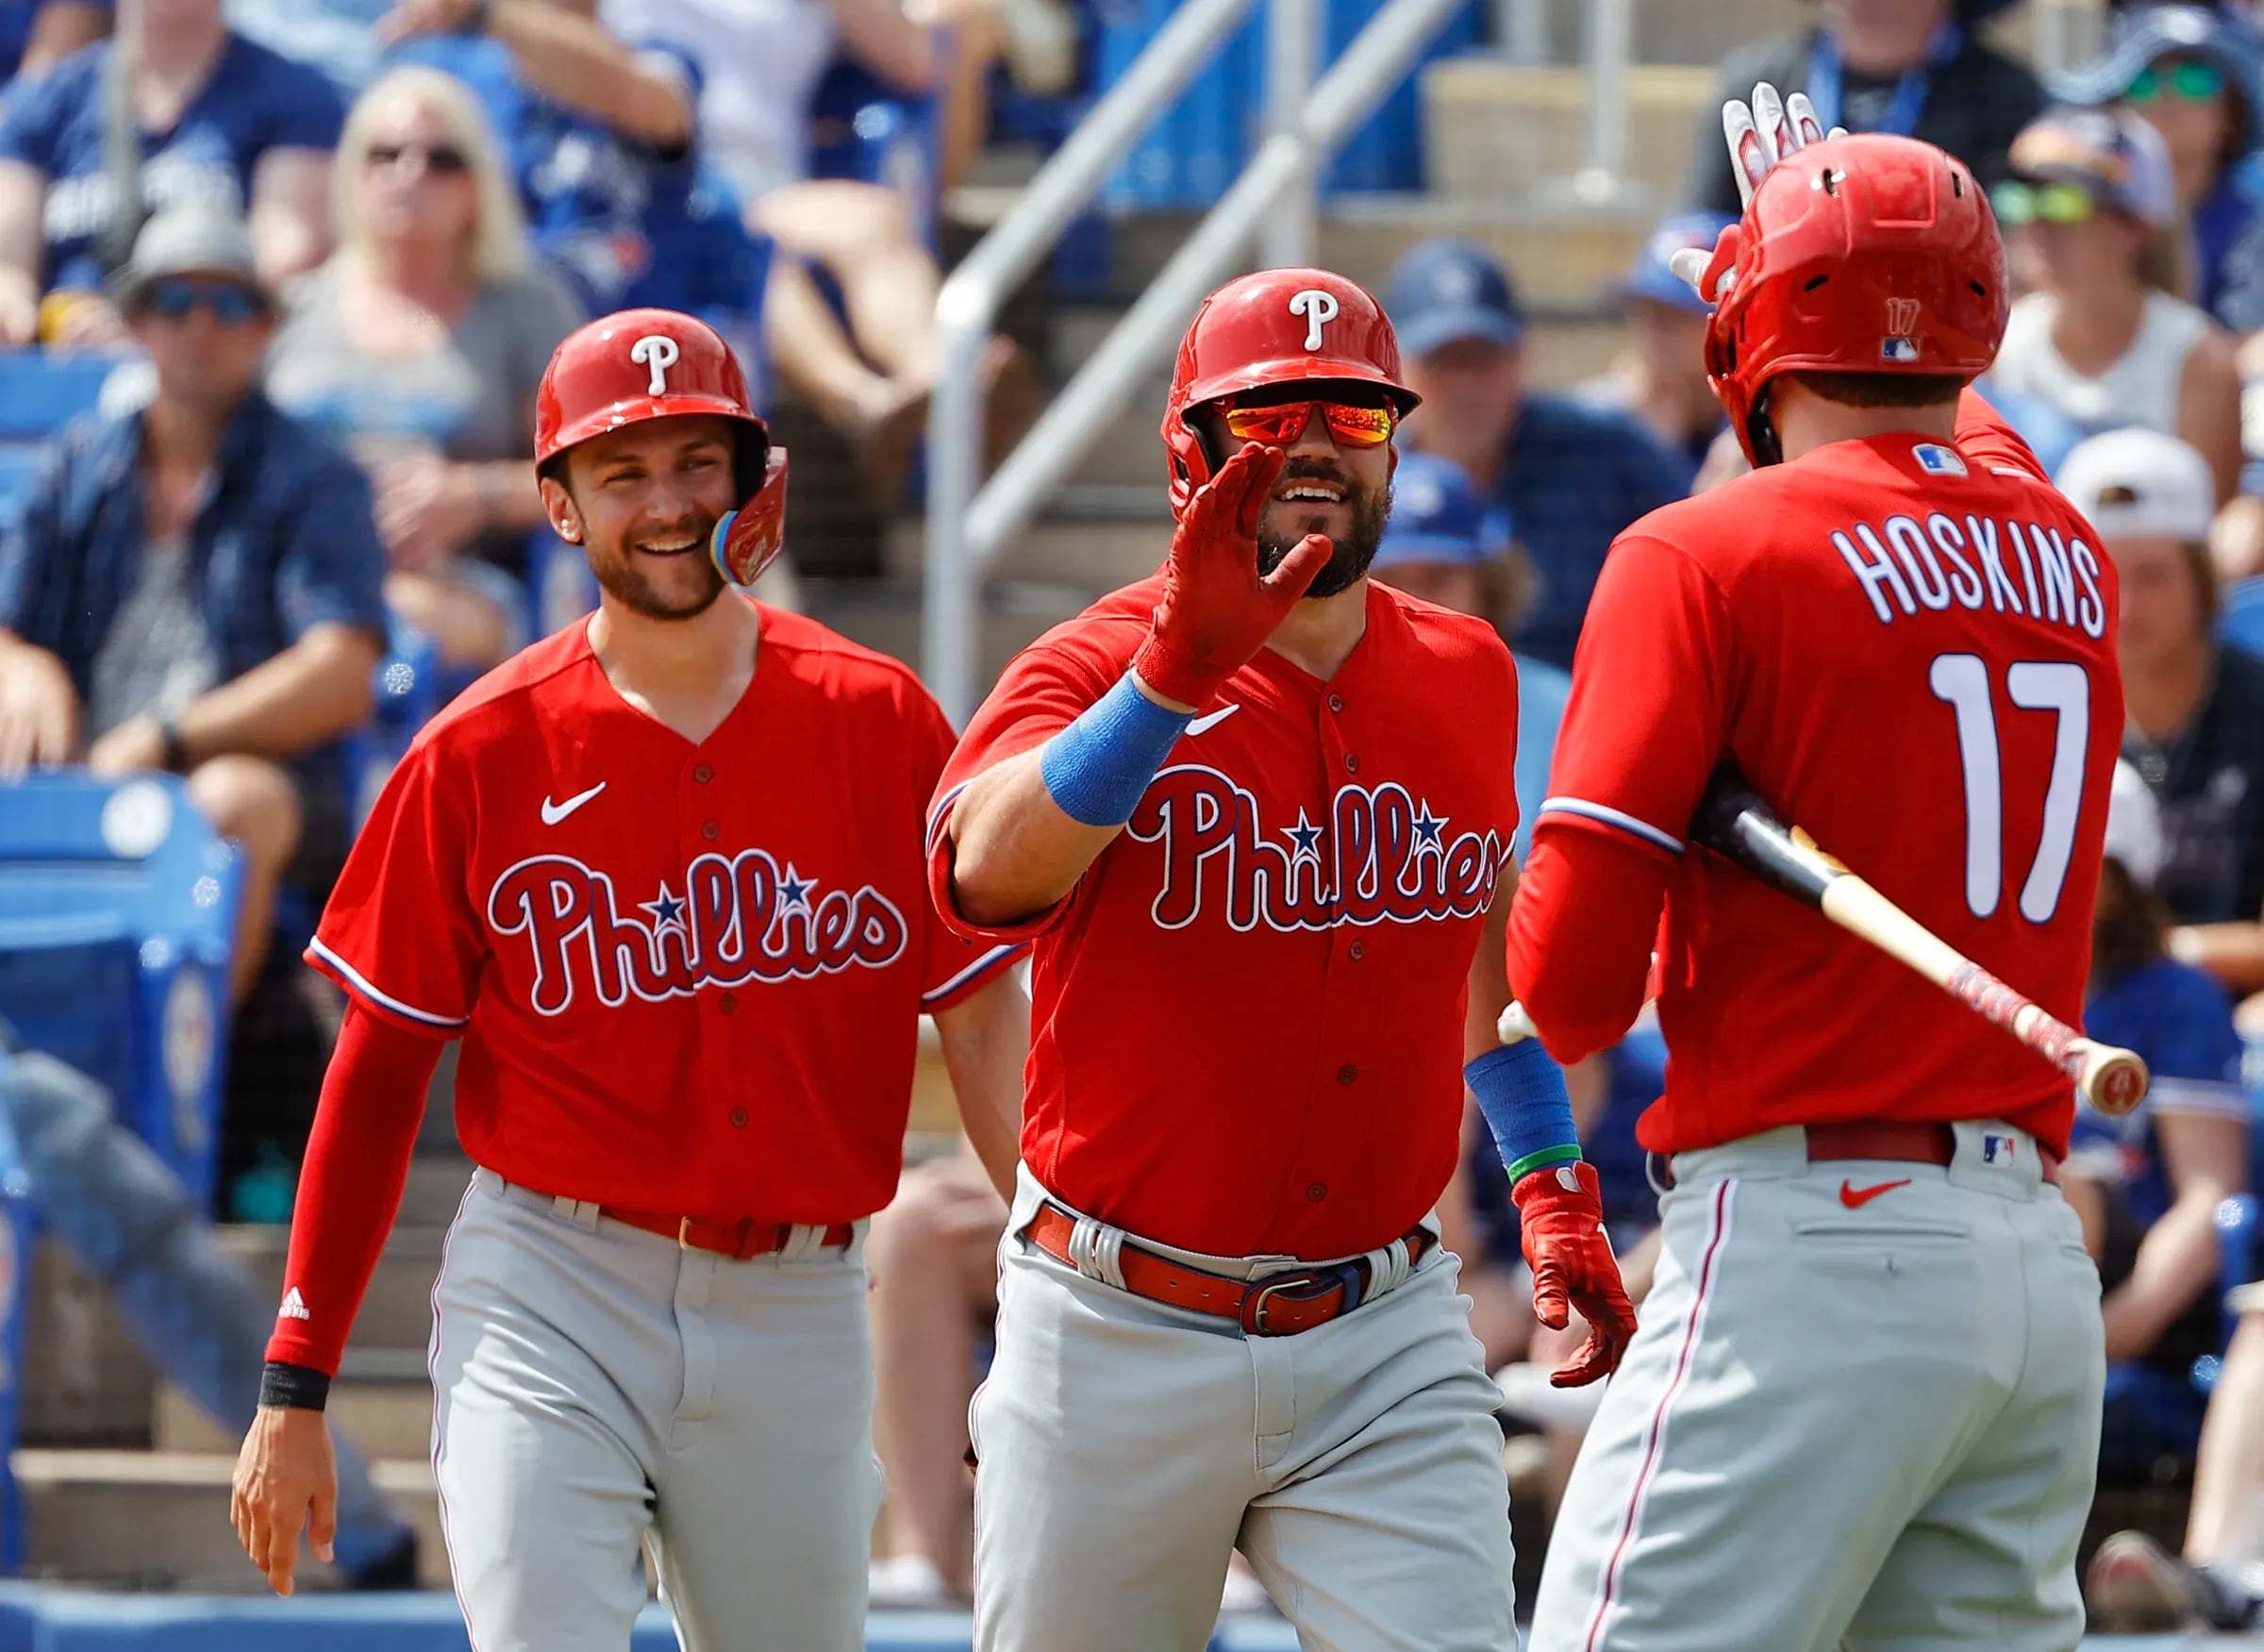 Photos from the Phillies spring training loss to the Blue Jays